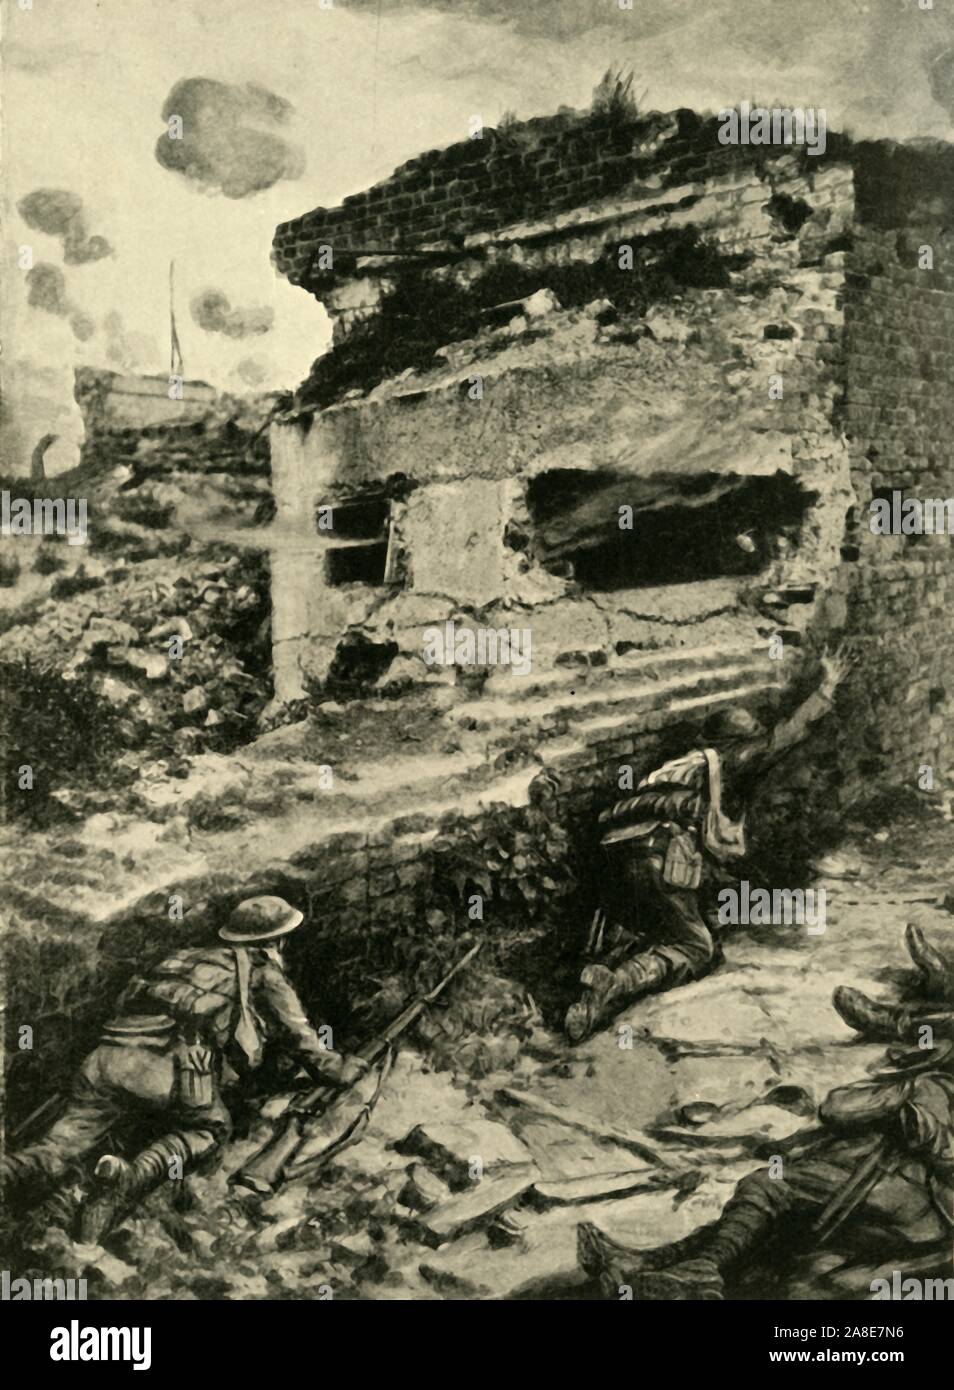 'The Enemy's New Defence System in 1917: attacking one of the German concrete gun emplacements', (c1920). Allied soldiers throw grenades into a pillbox during the First World War. From &quot;The Great World War: A History&quot;, Volume VII, edited by Frank A Mumby. [The Gresham Publishing Company Ltd, London, c1920] Stock Photo